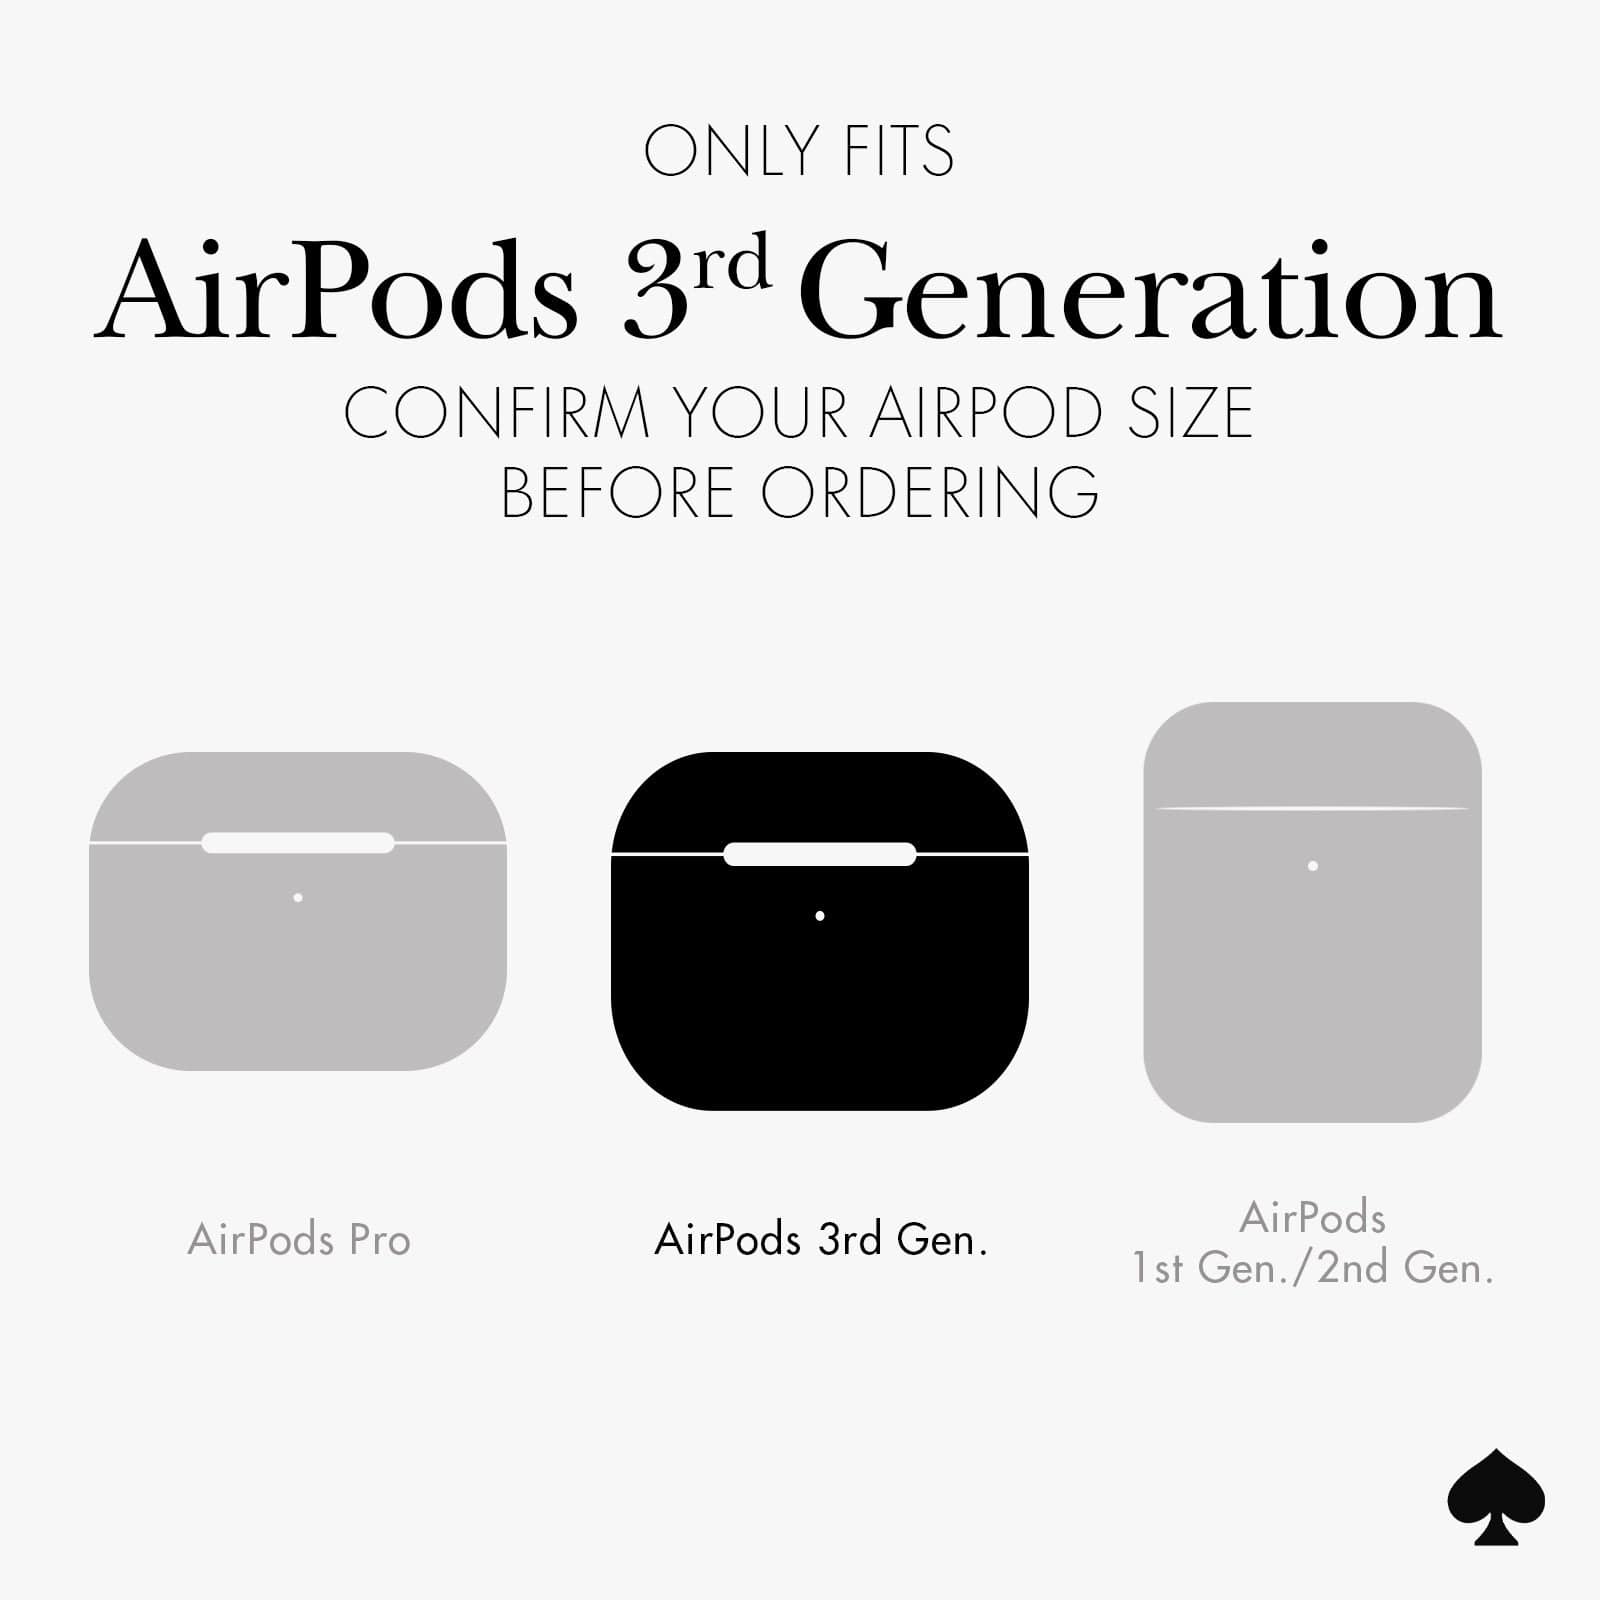 ONLY FITS AIRPODS 3RD GEN